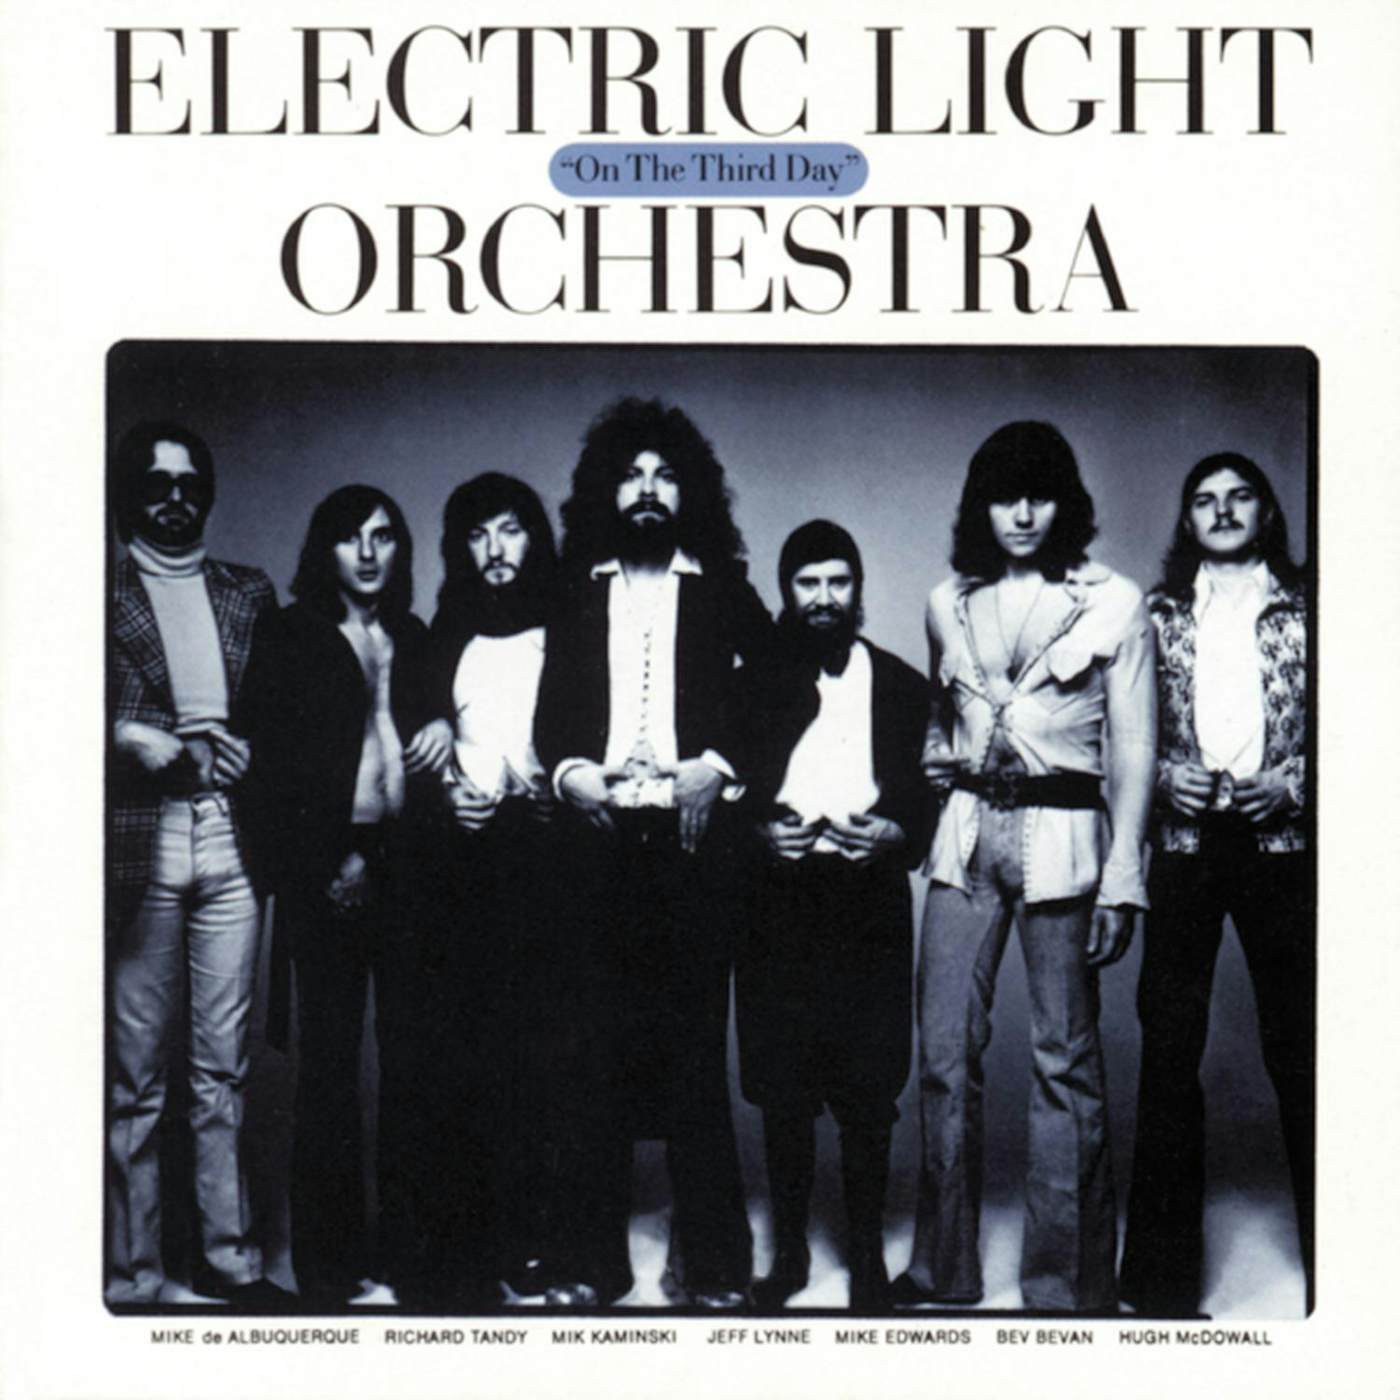 ELO (Electric Light Orchestra) ON THE THIRD DAY CD